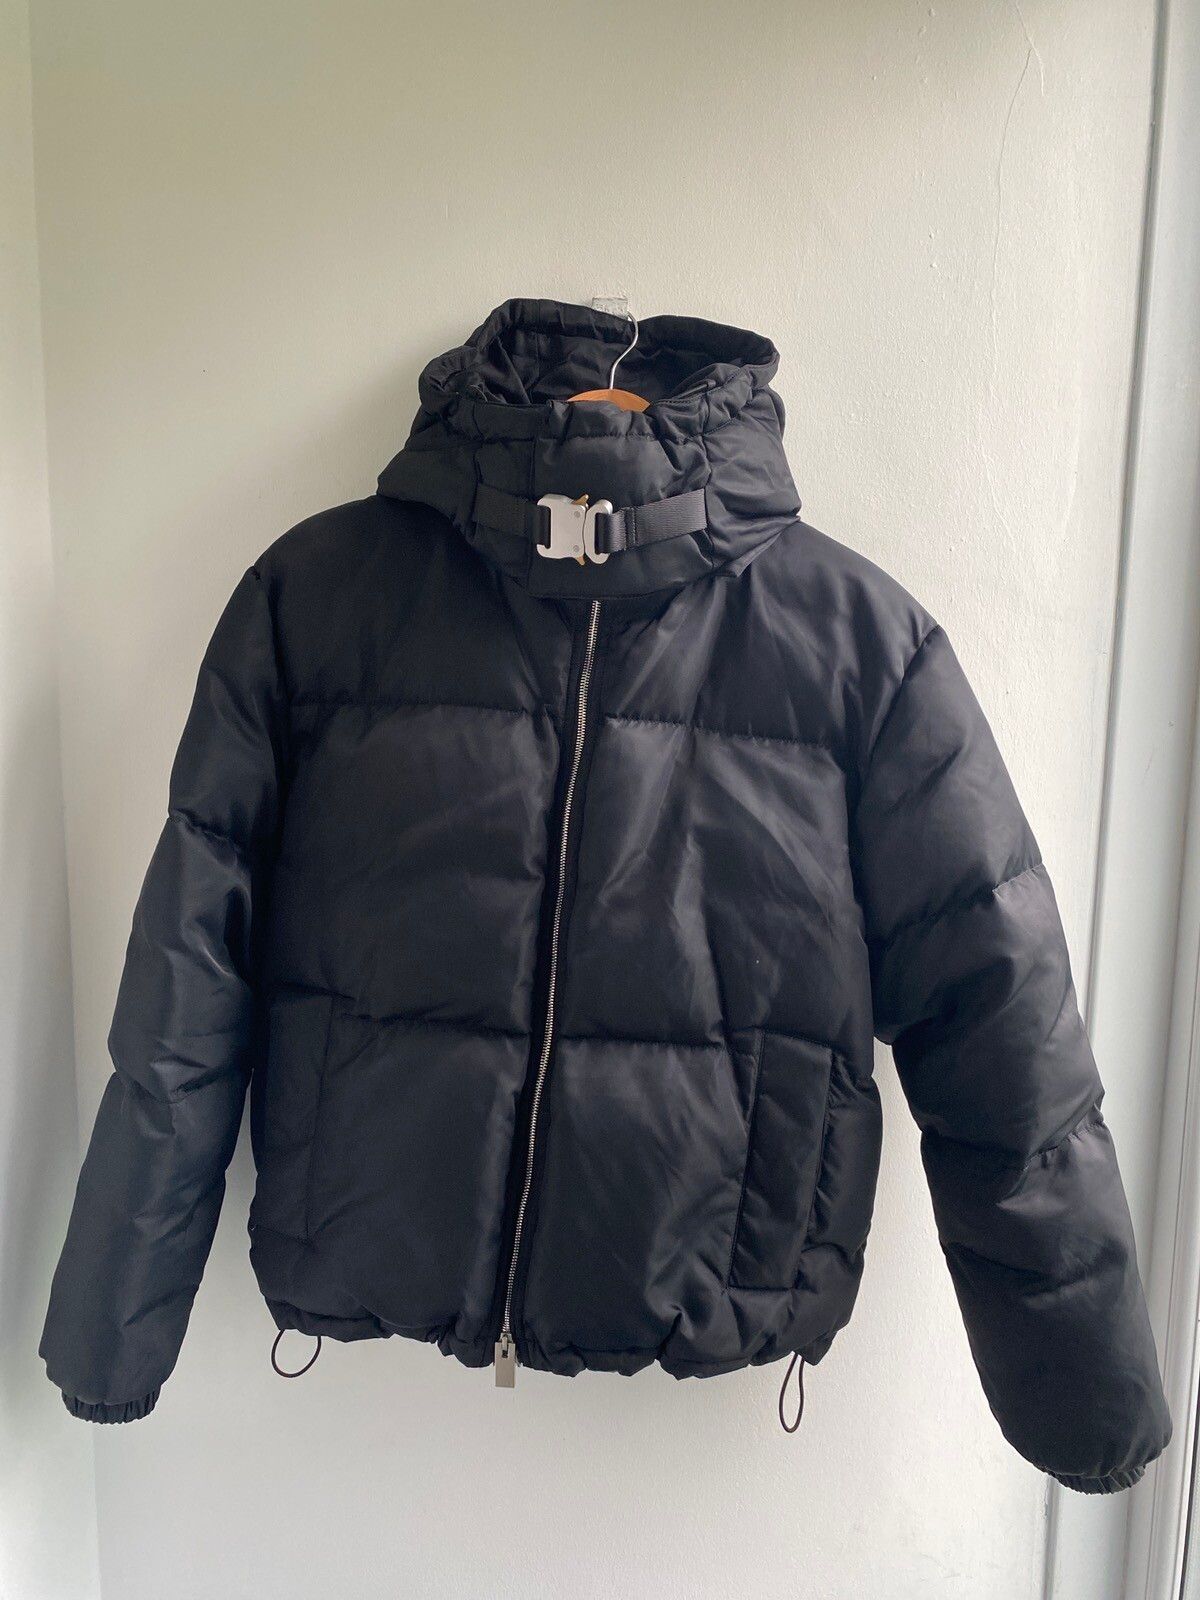 Givenchy ALYX BUCKLE PUFFER COAT | Grailed